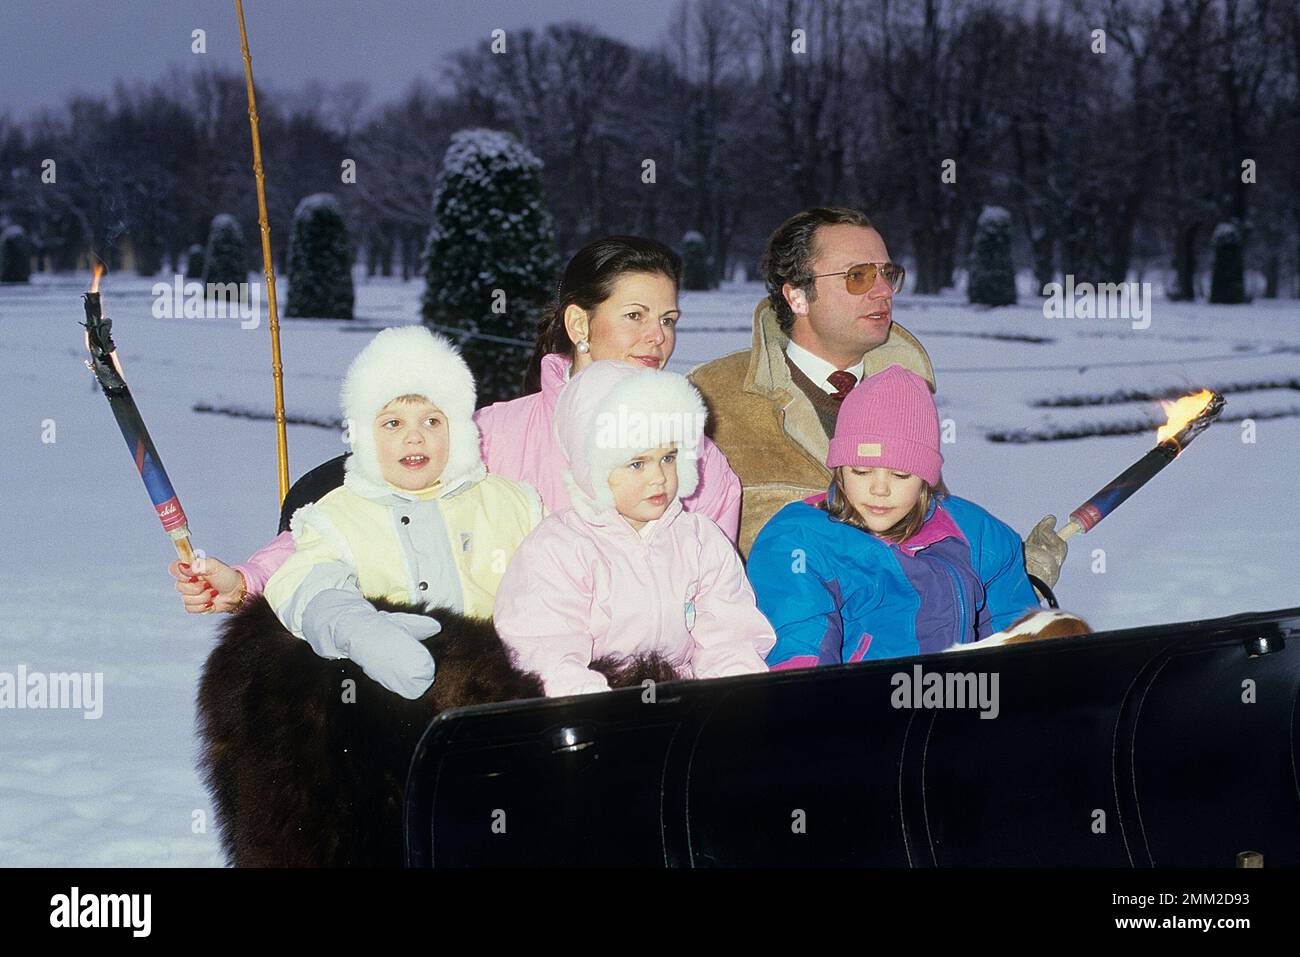 Carl XVI Gustaf, King of Sweden. Born 30 april 1946.  The King Carl XVI Gustaf,  Queen Silvia and their children, princess Madeleine, crown princess Victoria, prince Carl Philip, pictured in the park of Drottningholm castle 1985 at the annual christmas/winter photo session. Stock Photo